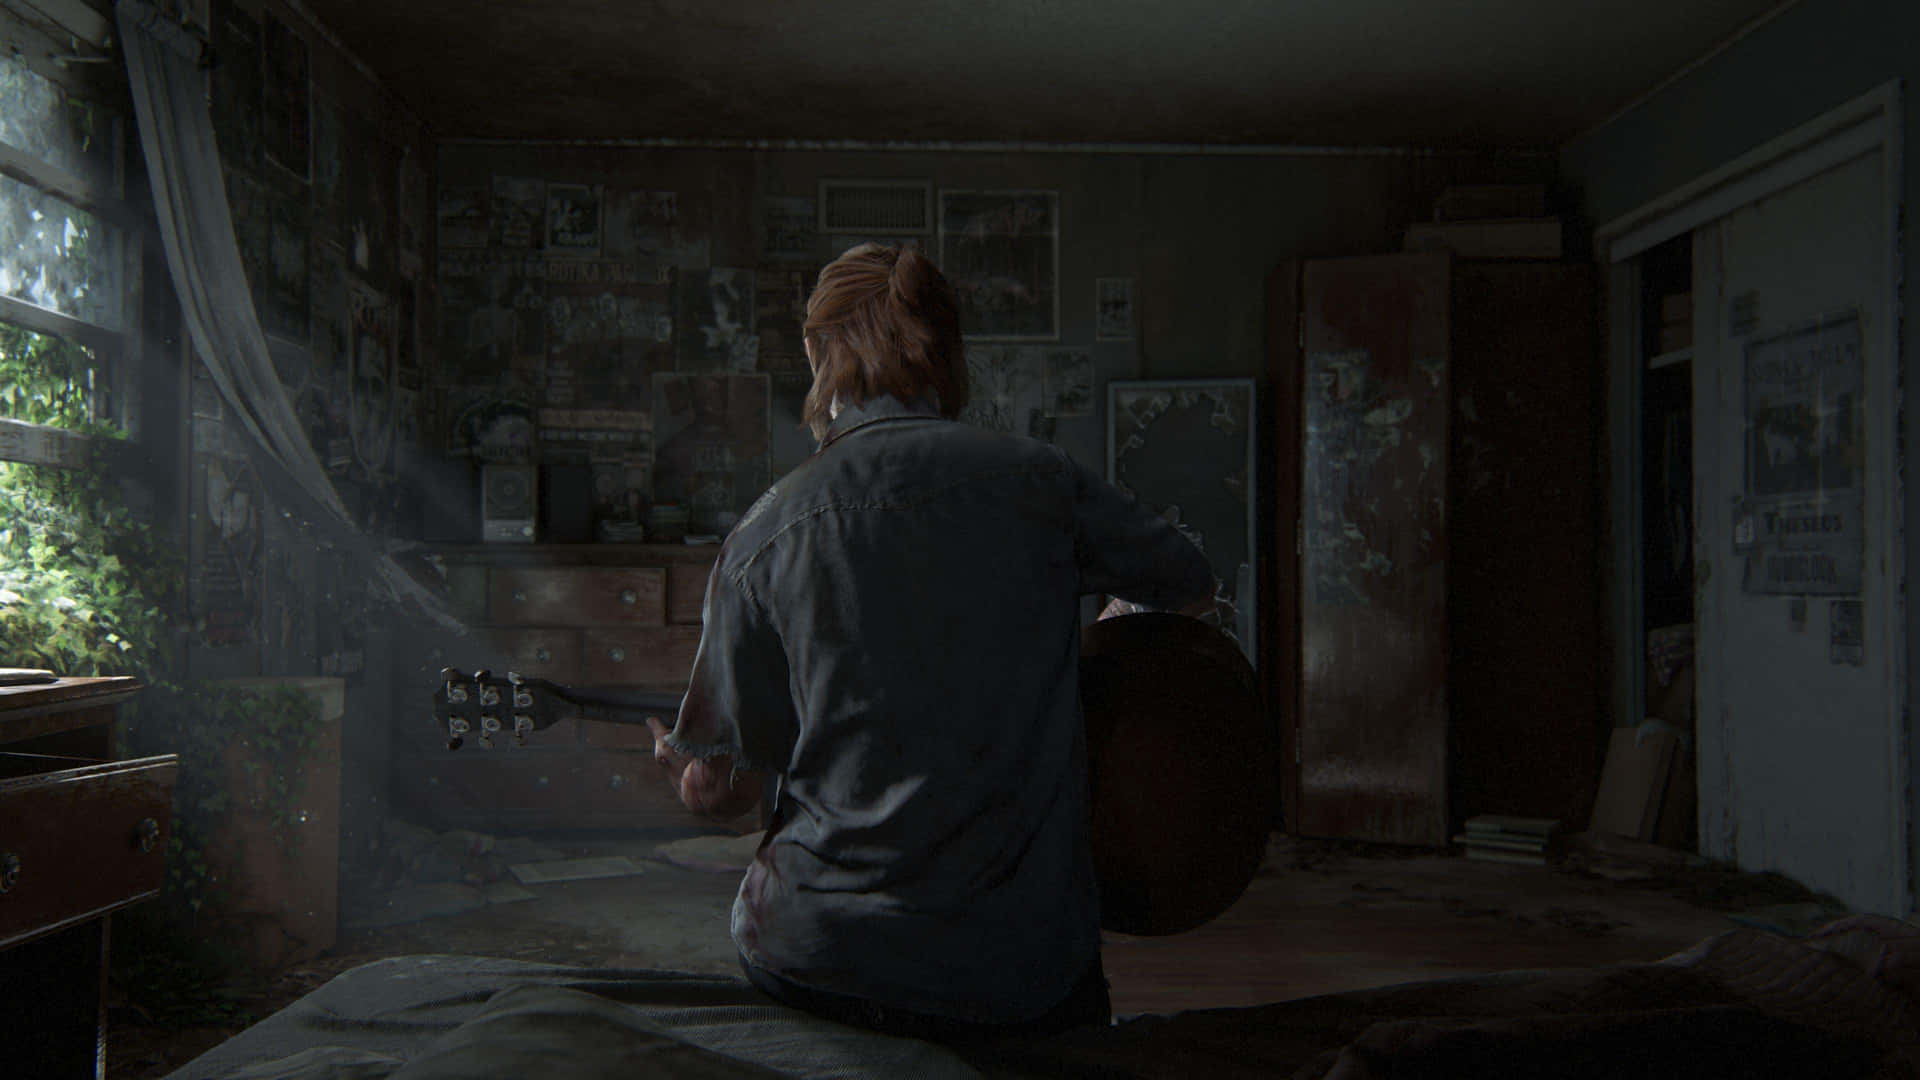 Brave Survival in a Post-Apocalyptic World - The Last of Us 2 Wallpaper